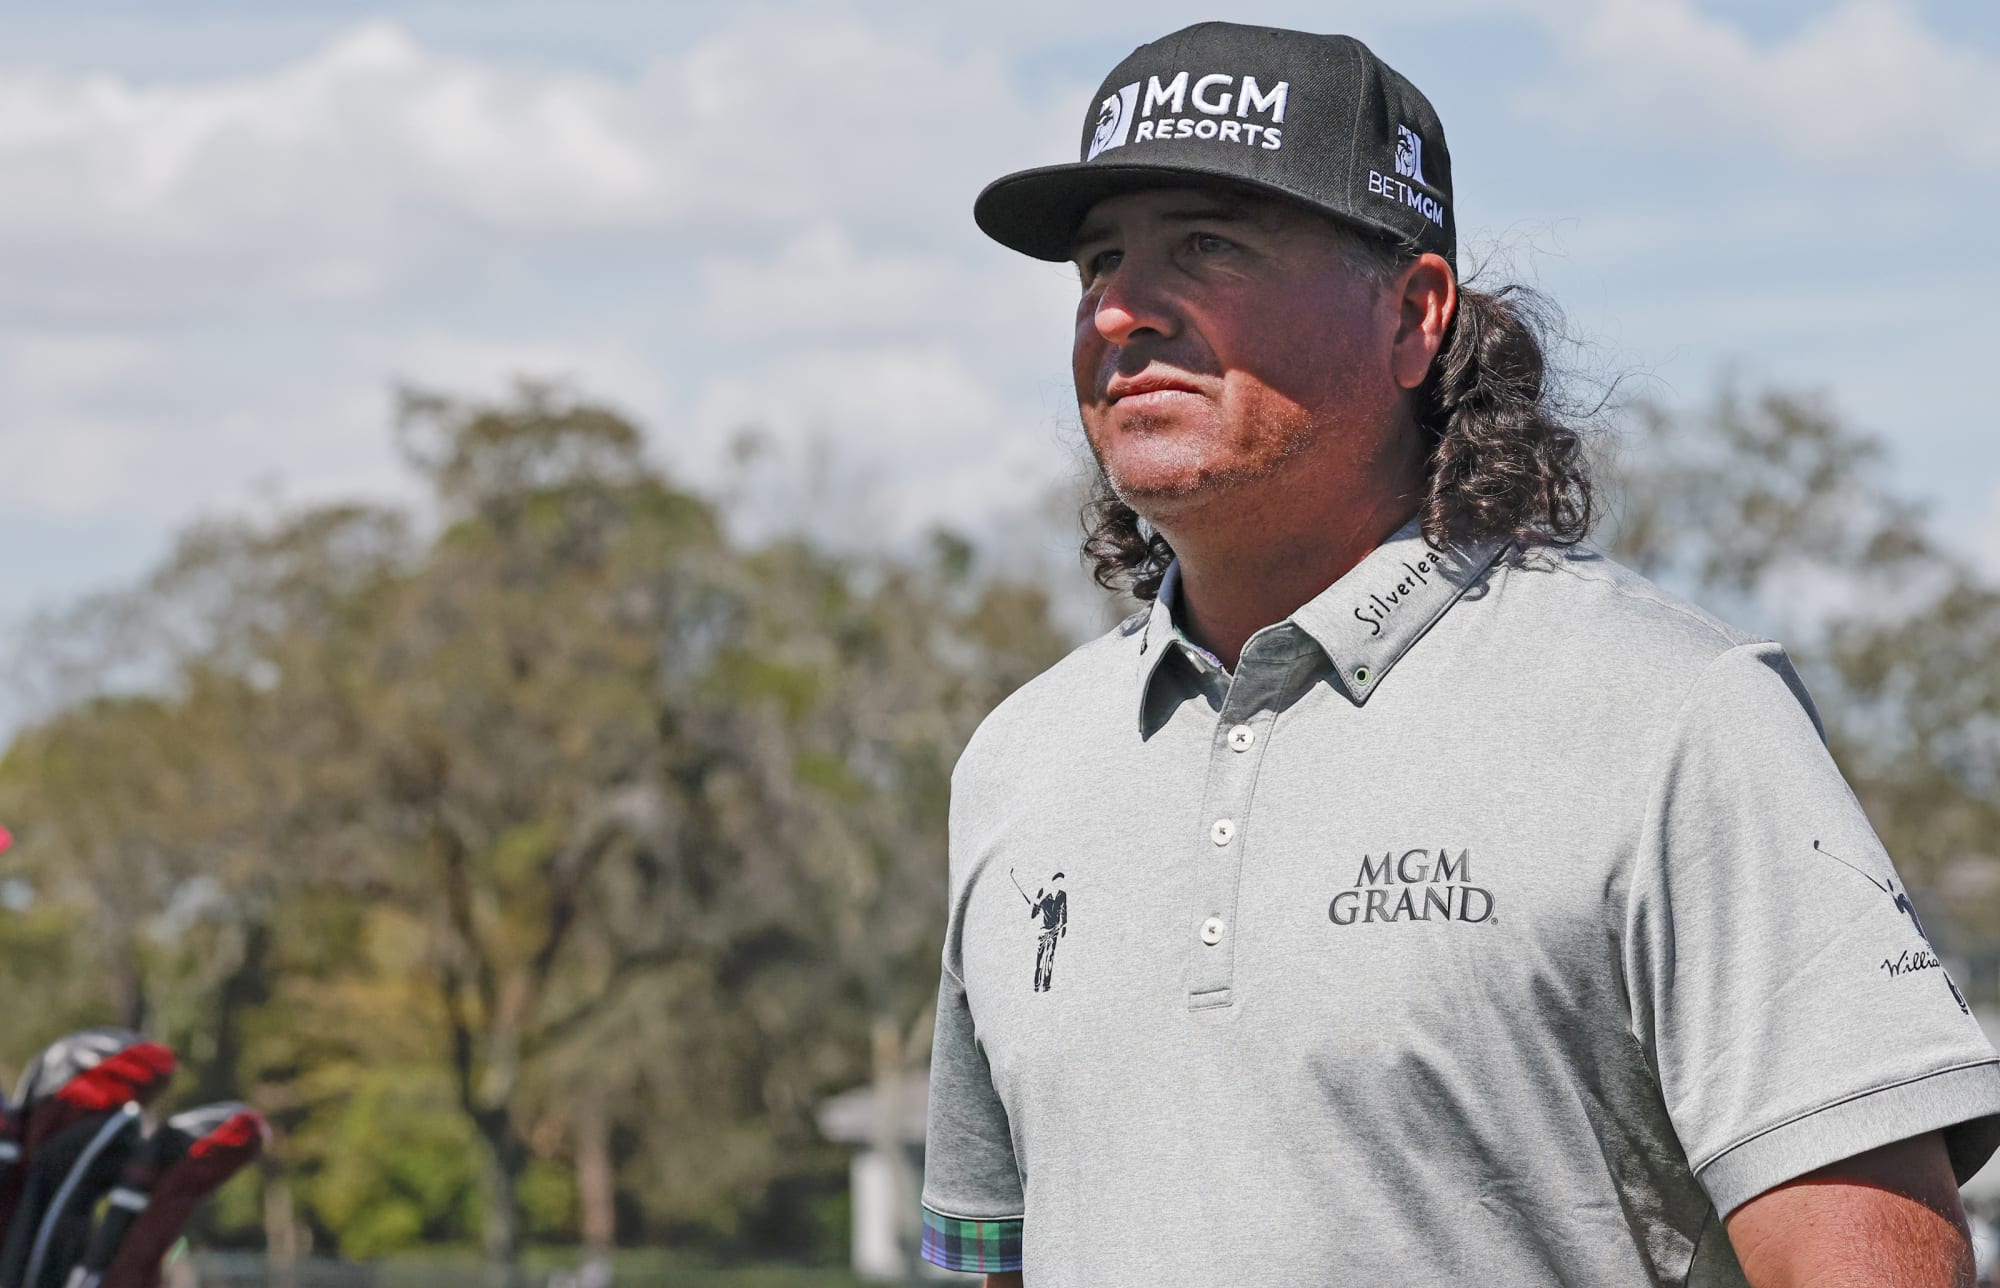 Pat Perez Opens Up on ‘Unforgivable Act’ Committed By Fellow LIV Golfer Phil Mickelson